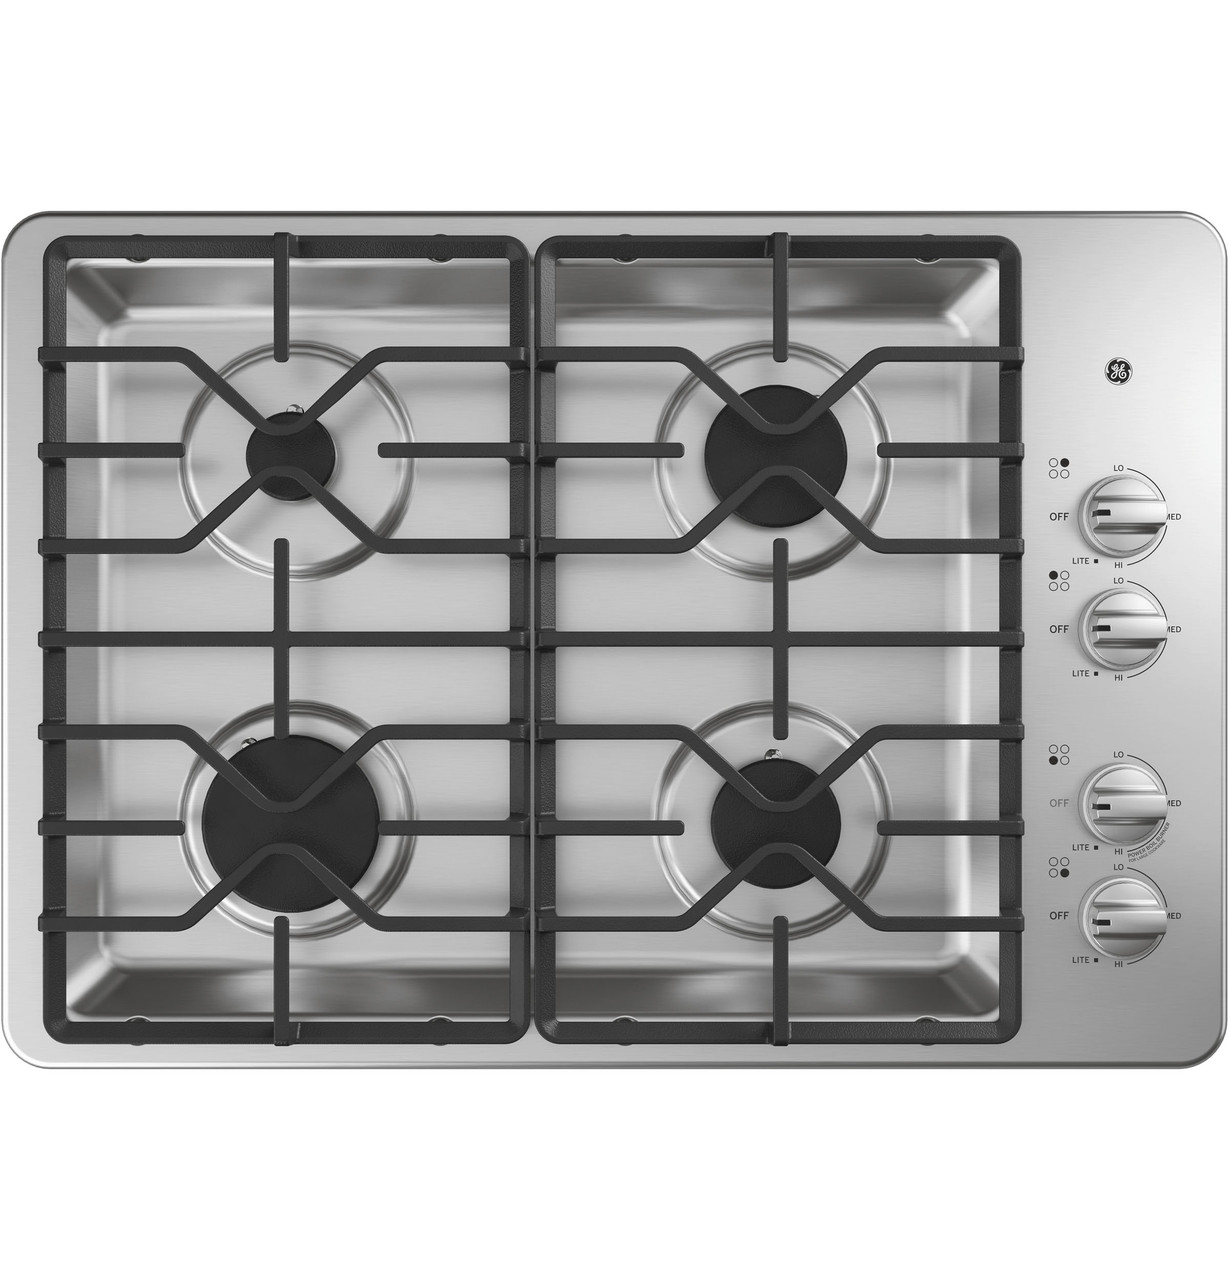 GE JGP3030SLSS 30 Inch Gas Cooktop with MAX System